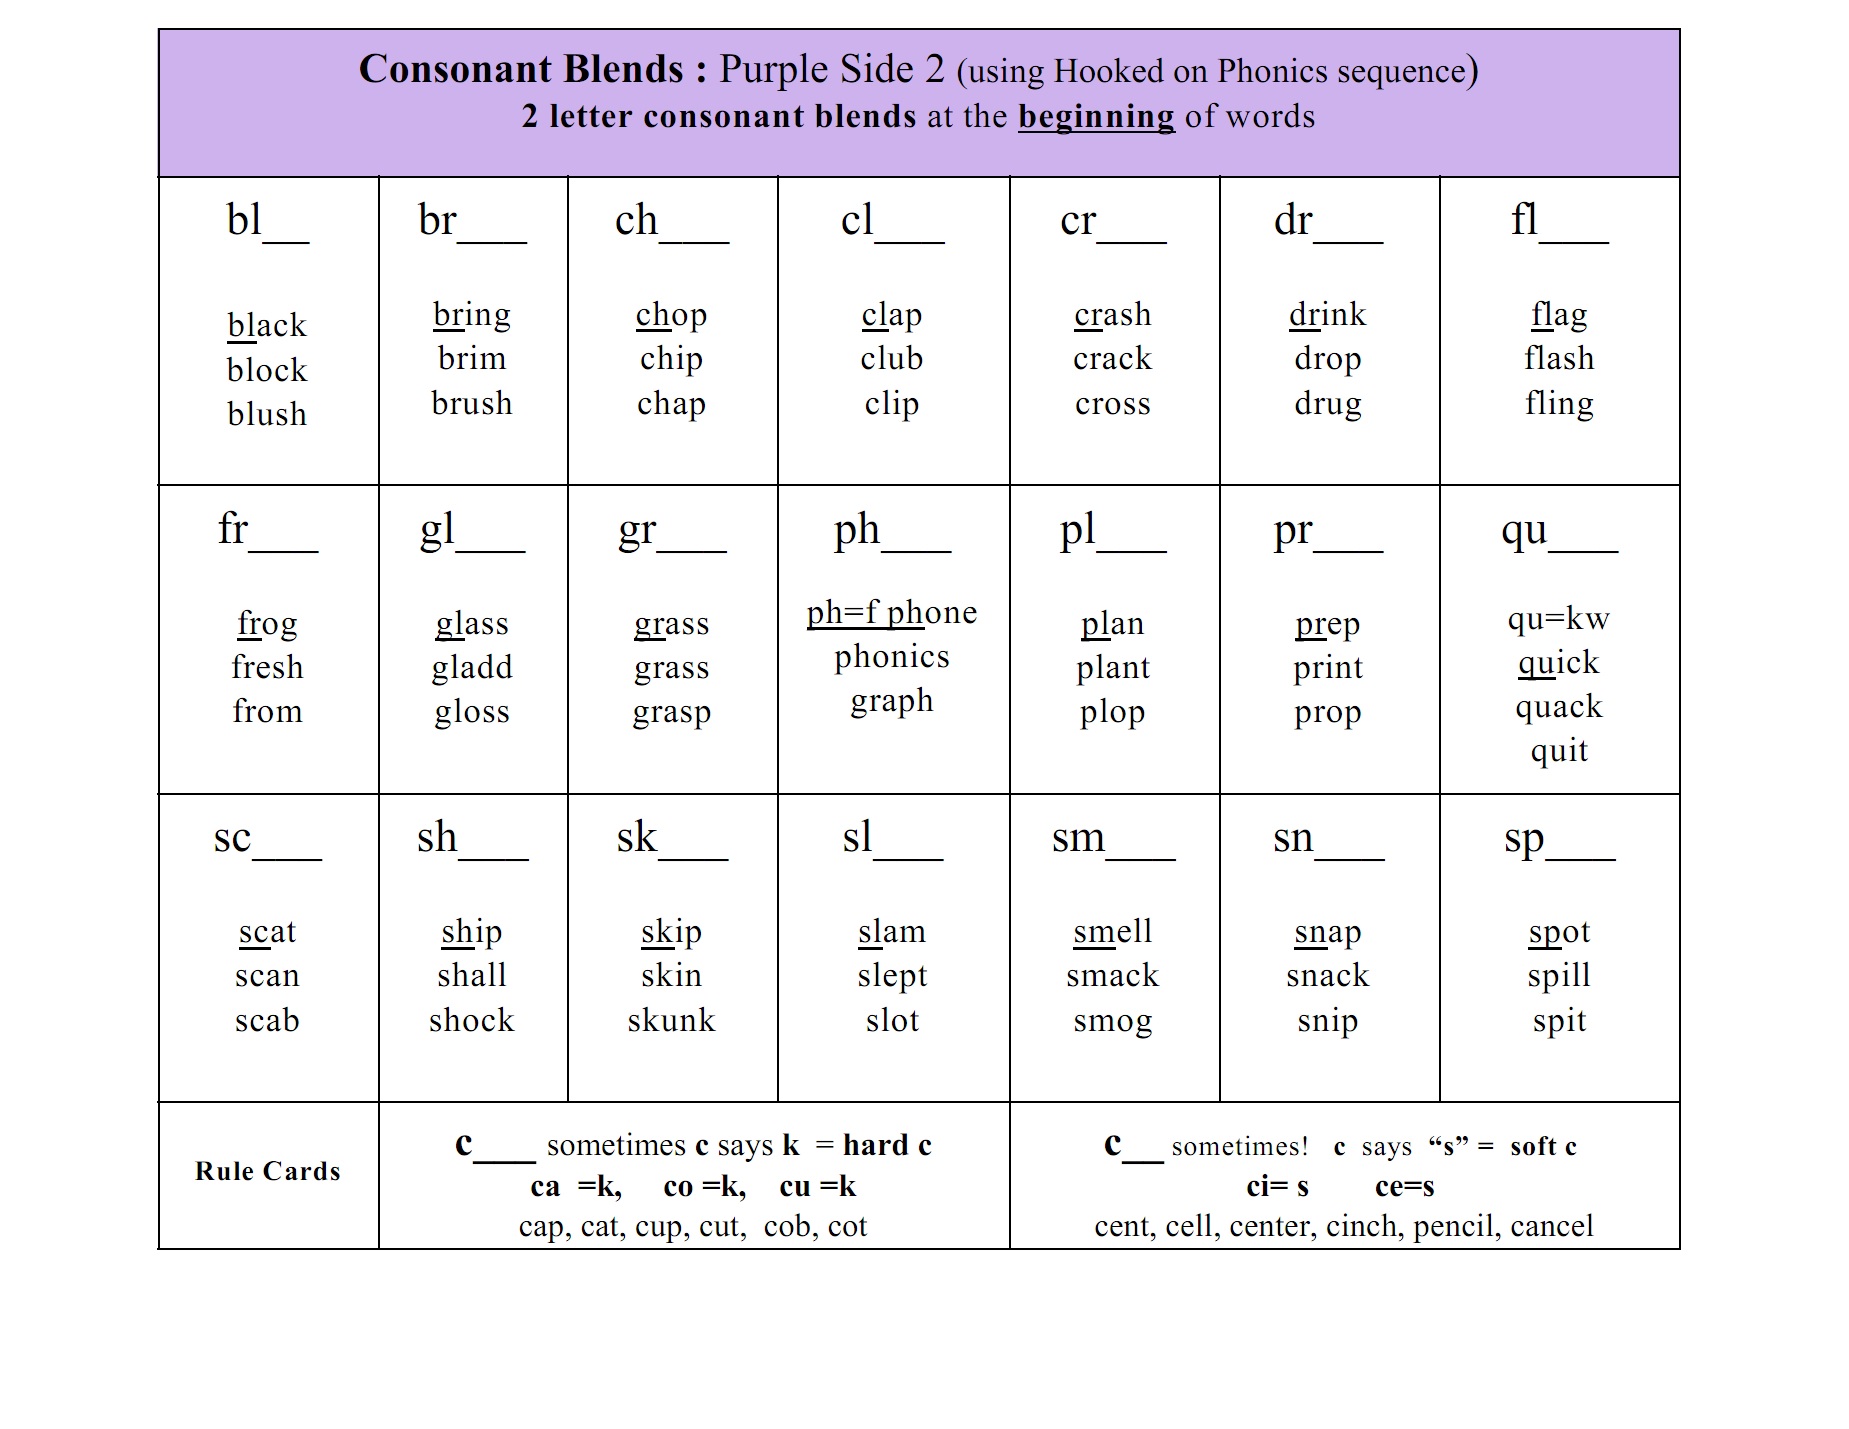 What are some rules about consonant blends?